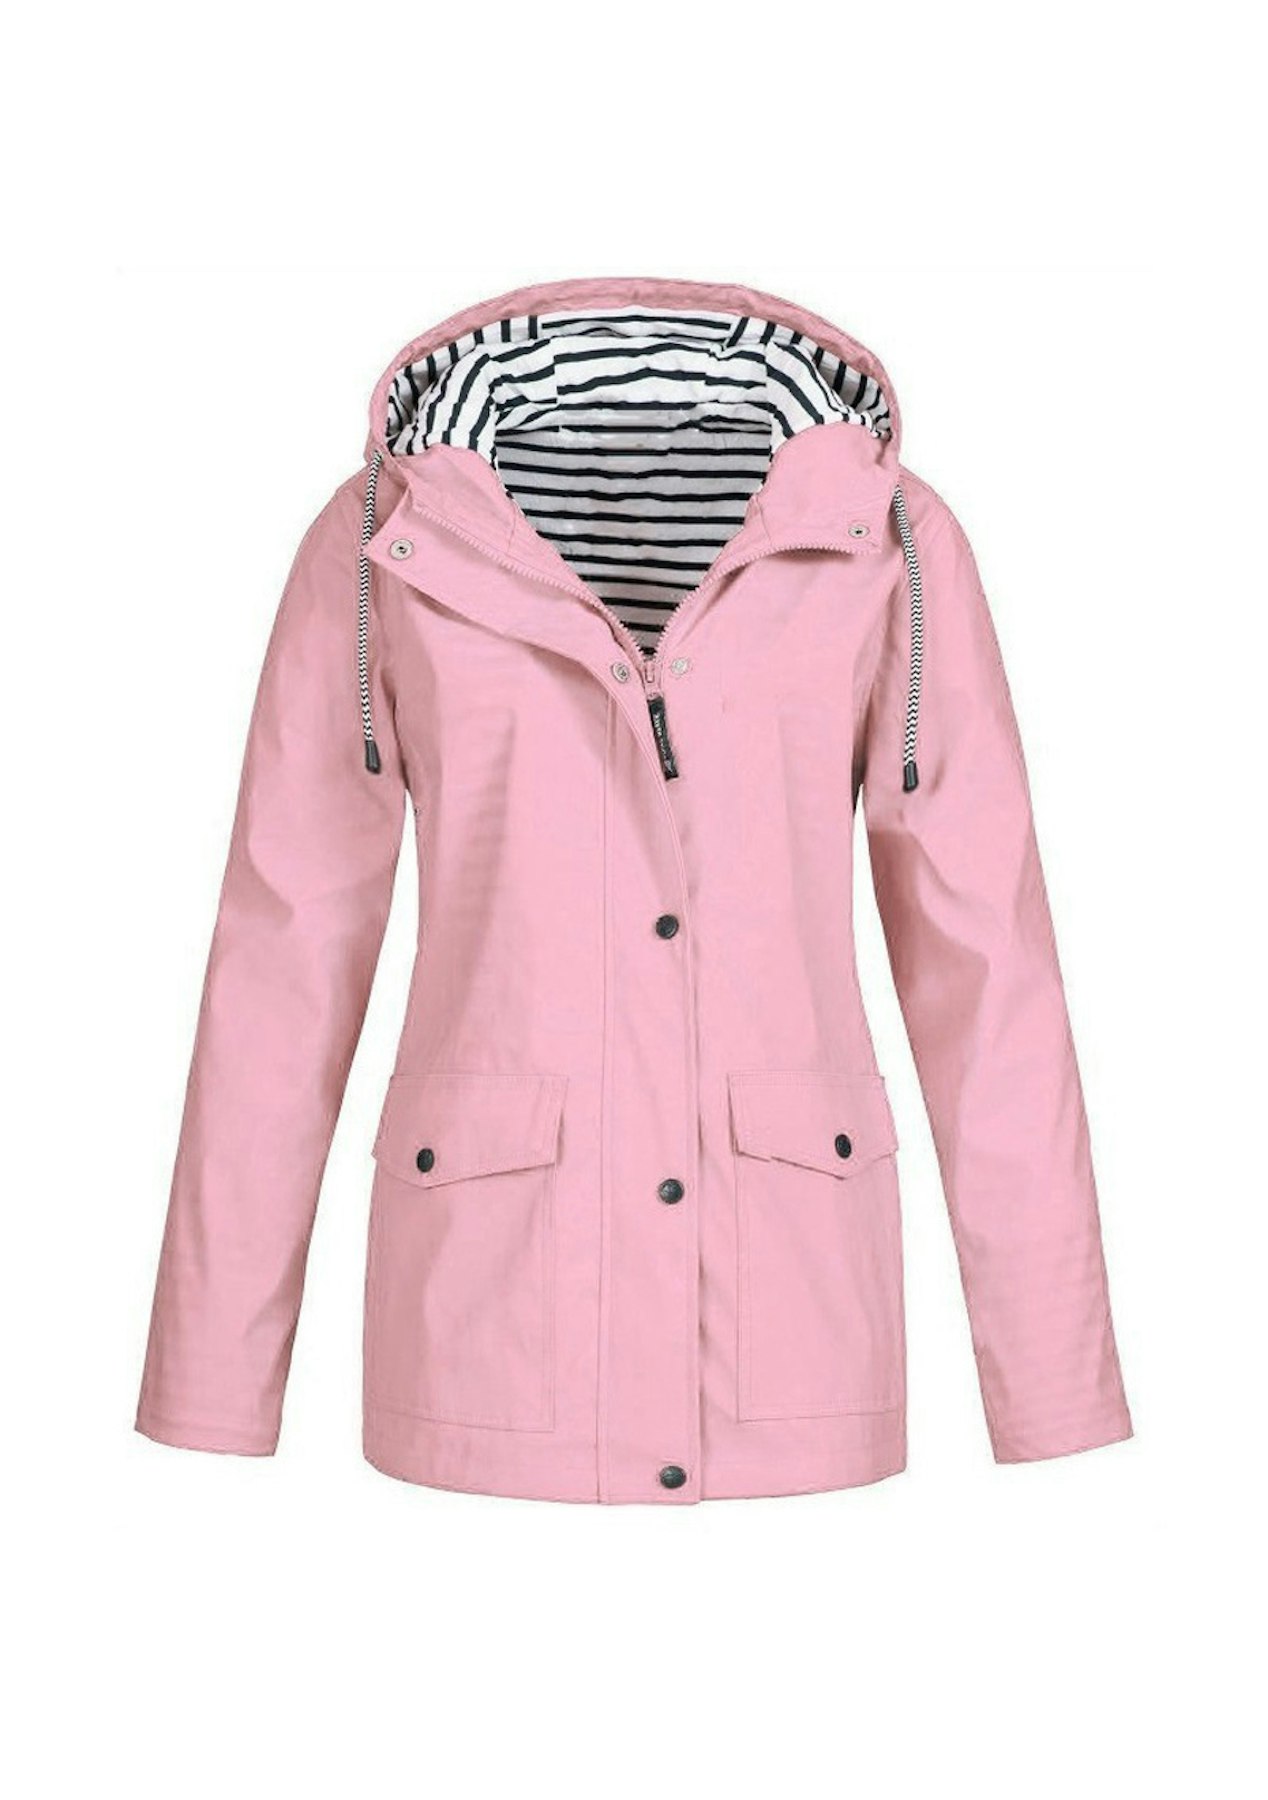 Winter Rain Jacket with White/Black Striped Lining - Pink - Onceit